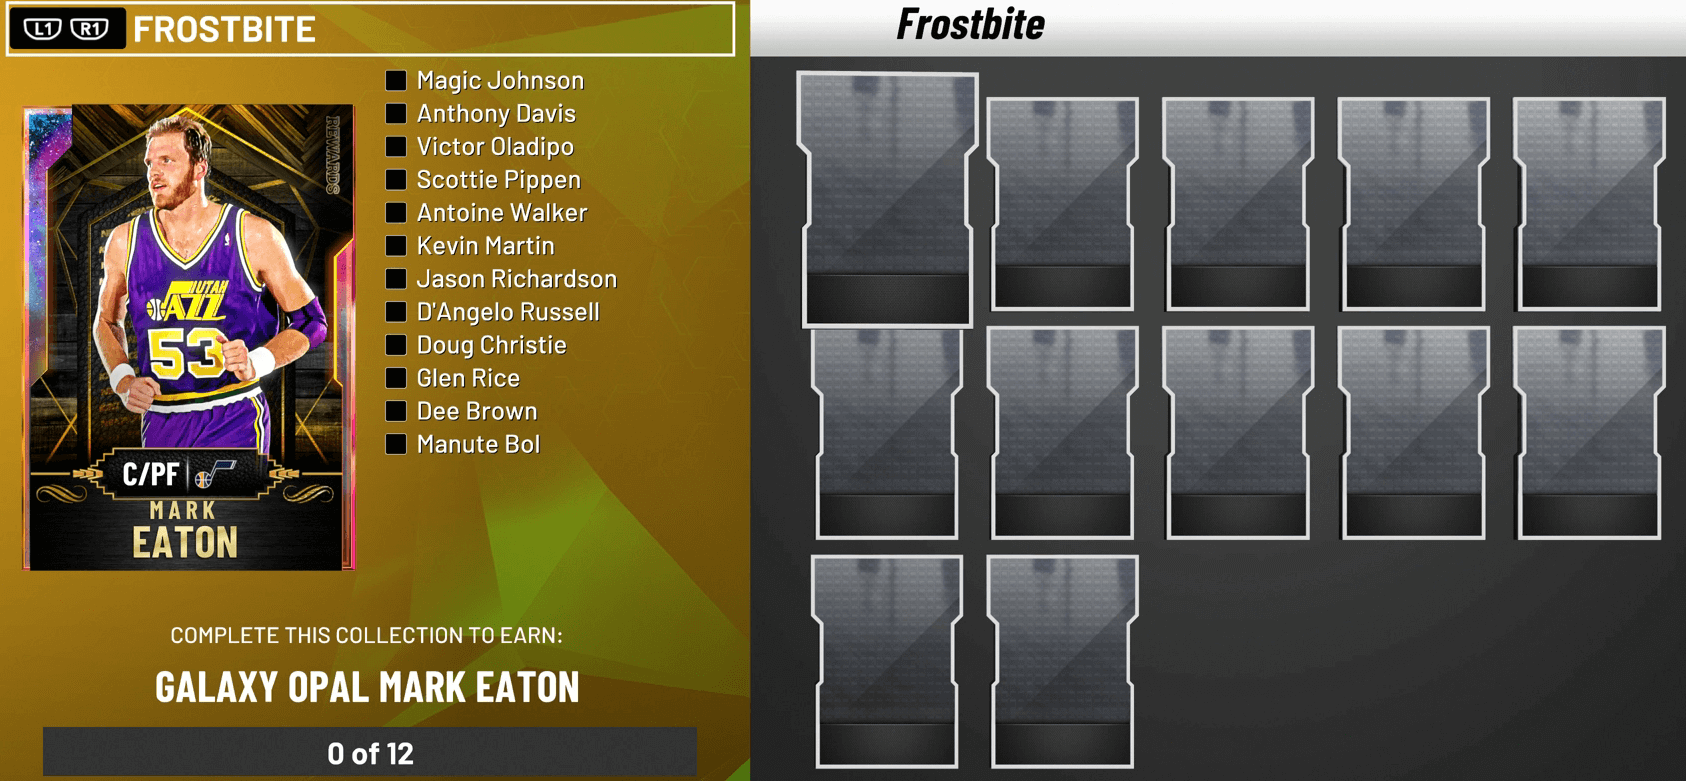 nba-2k20-myteam-frost-bite-collection